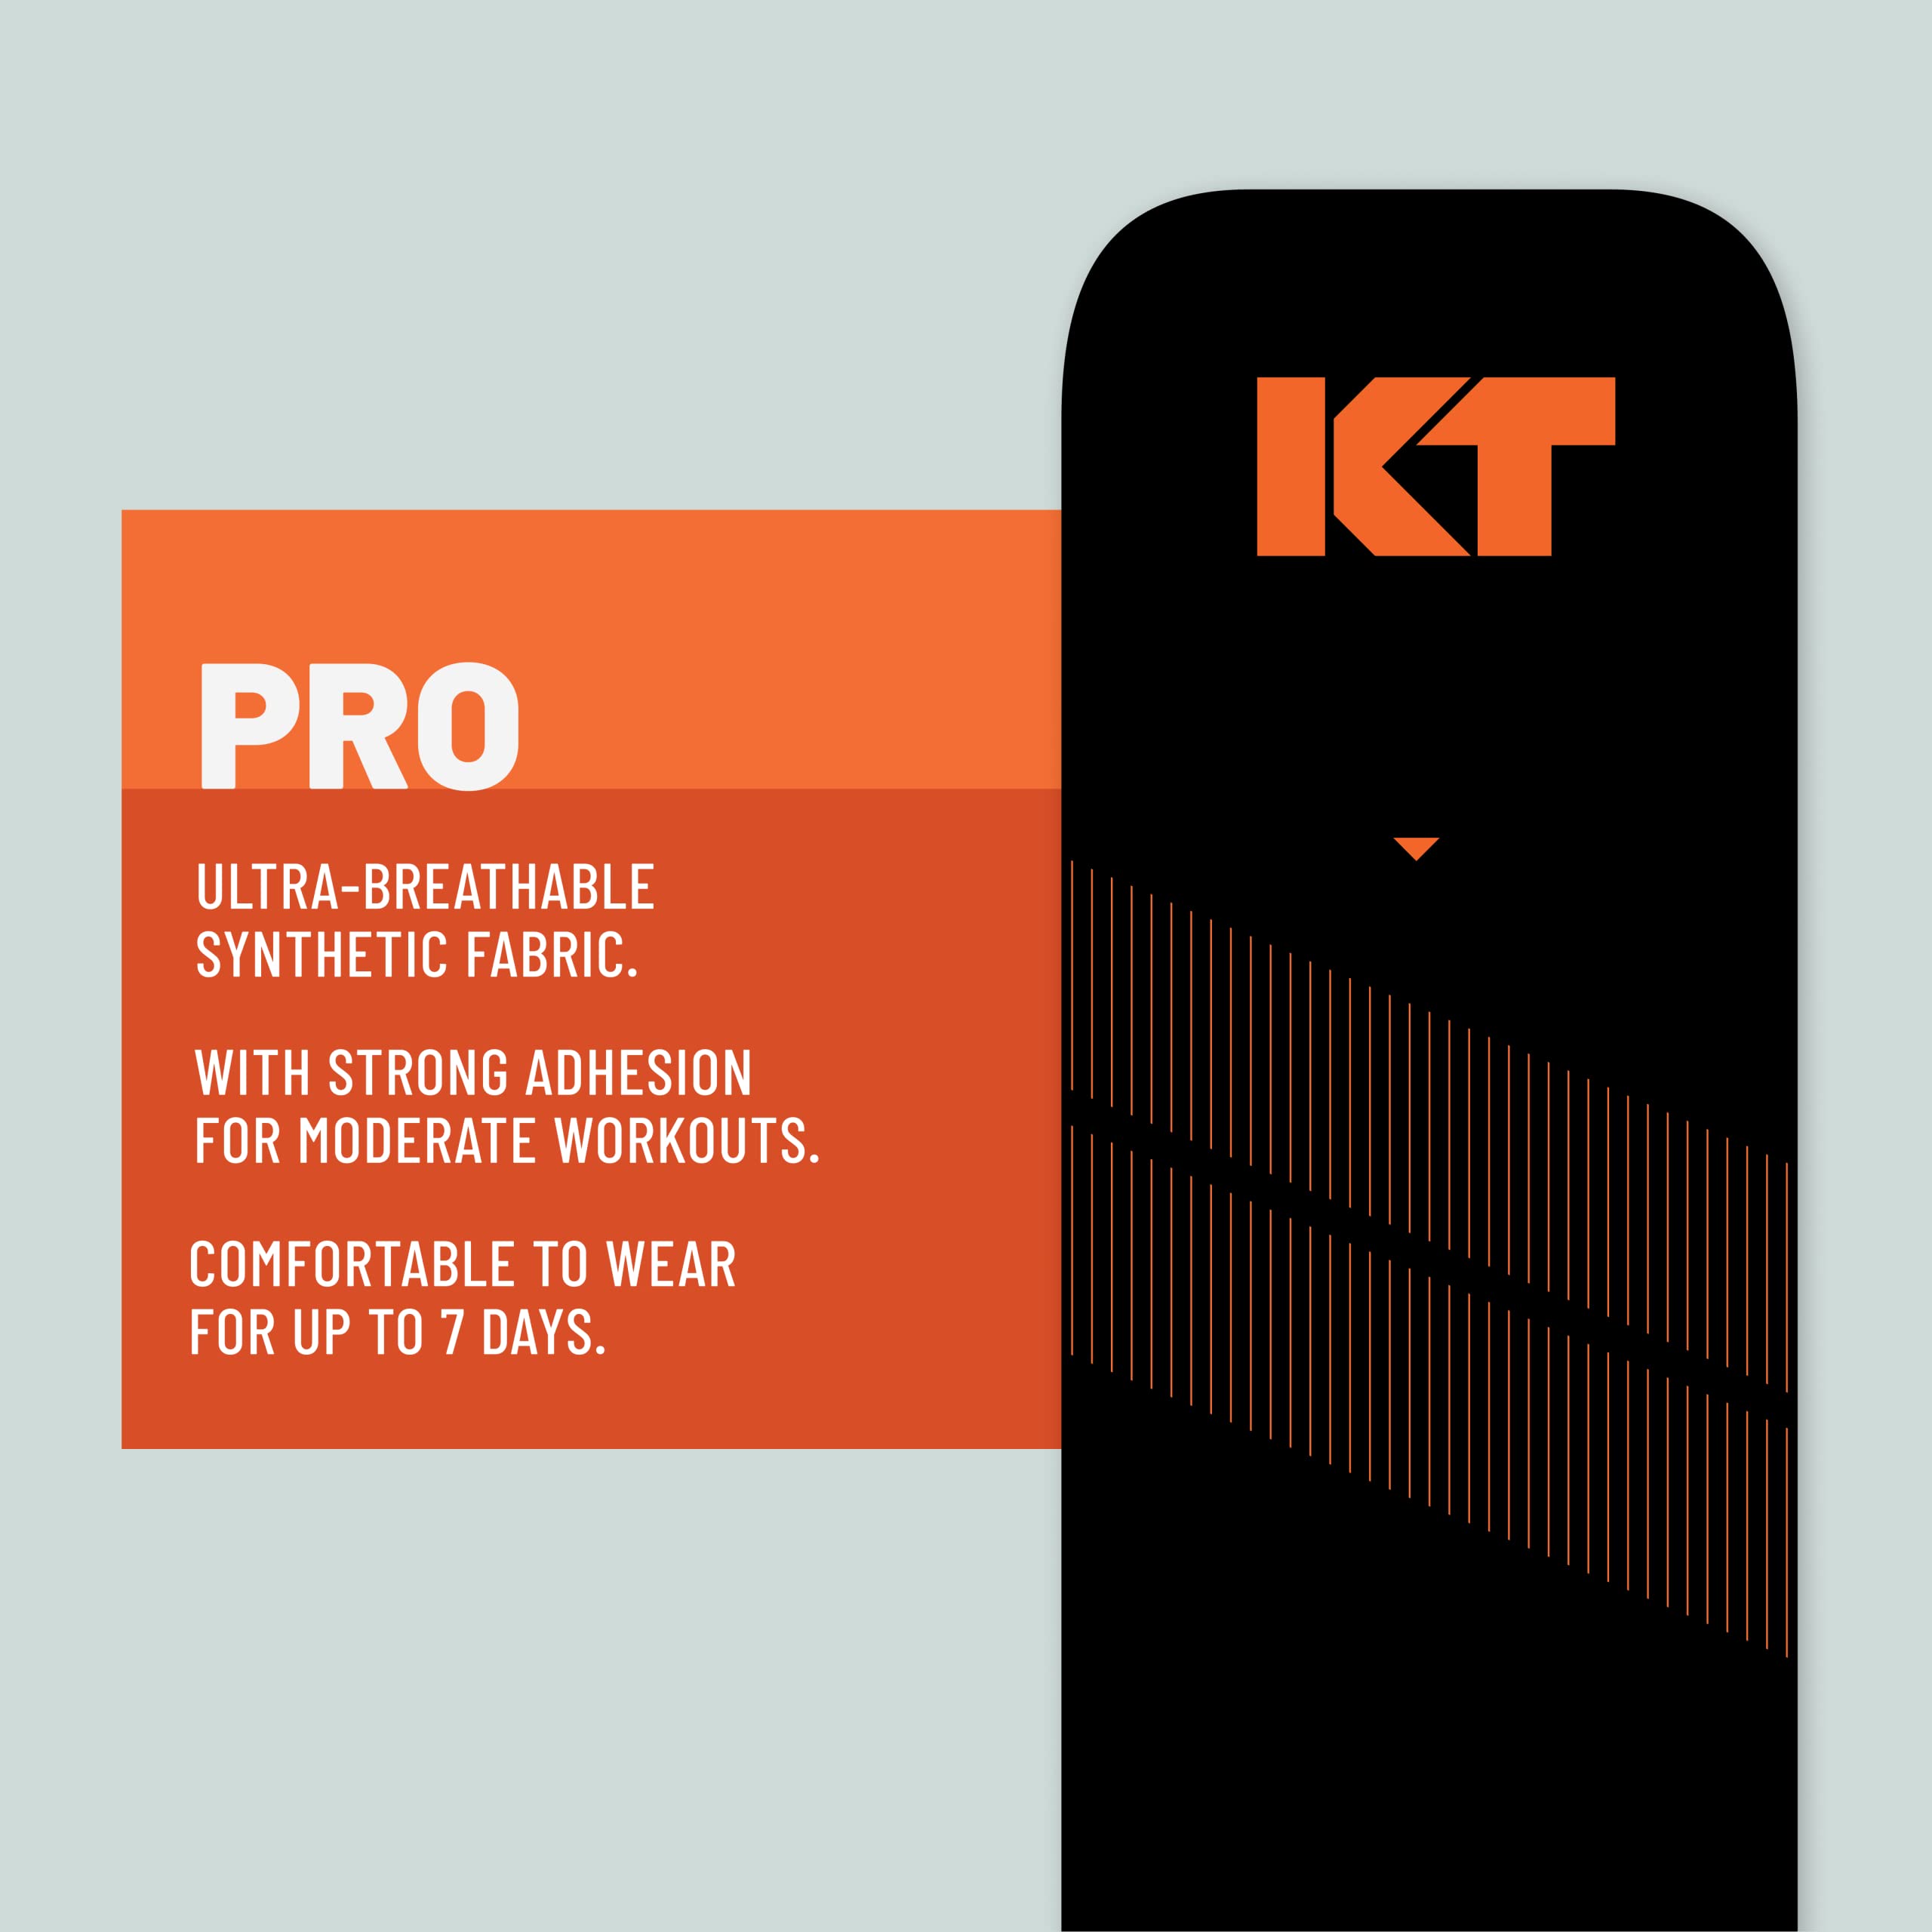 KT Tape Pro Kinesiology Therapeutic Sports Tape , Stealth Beige